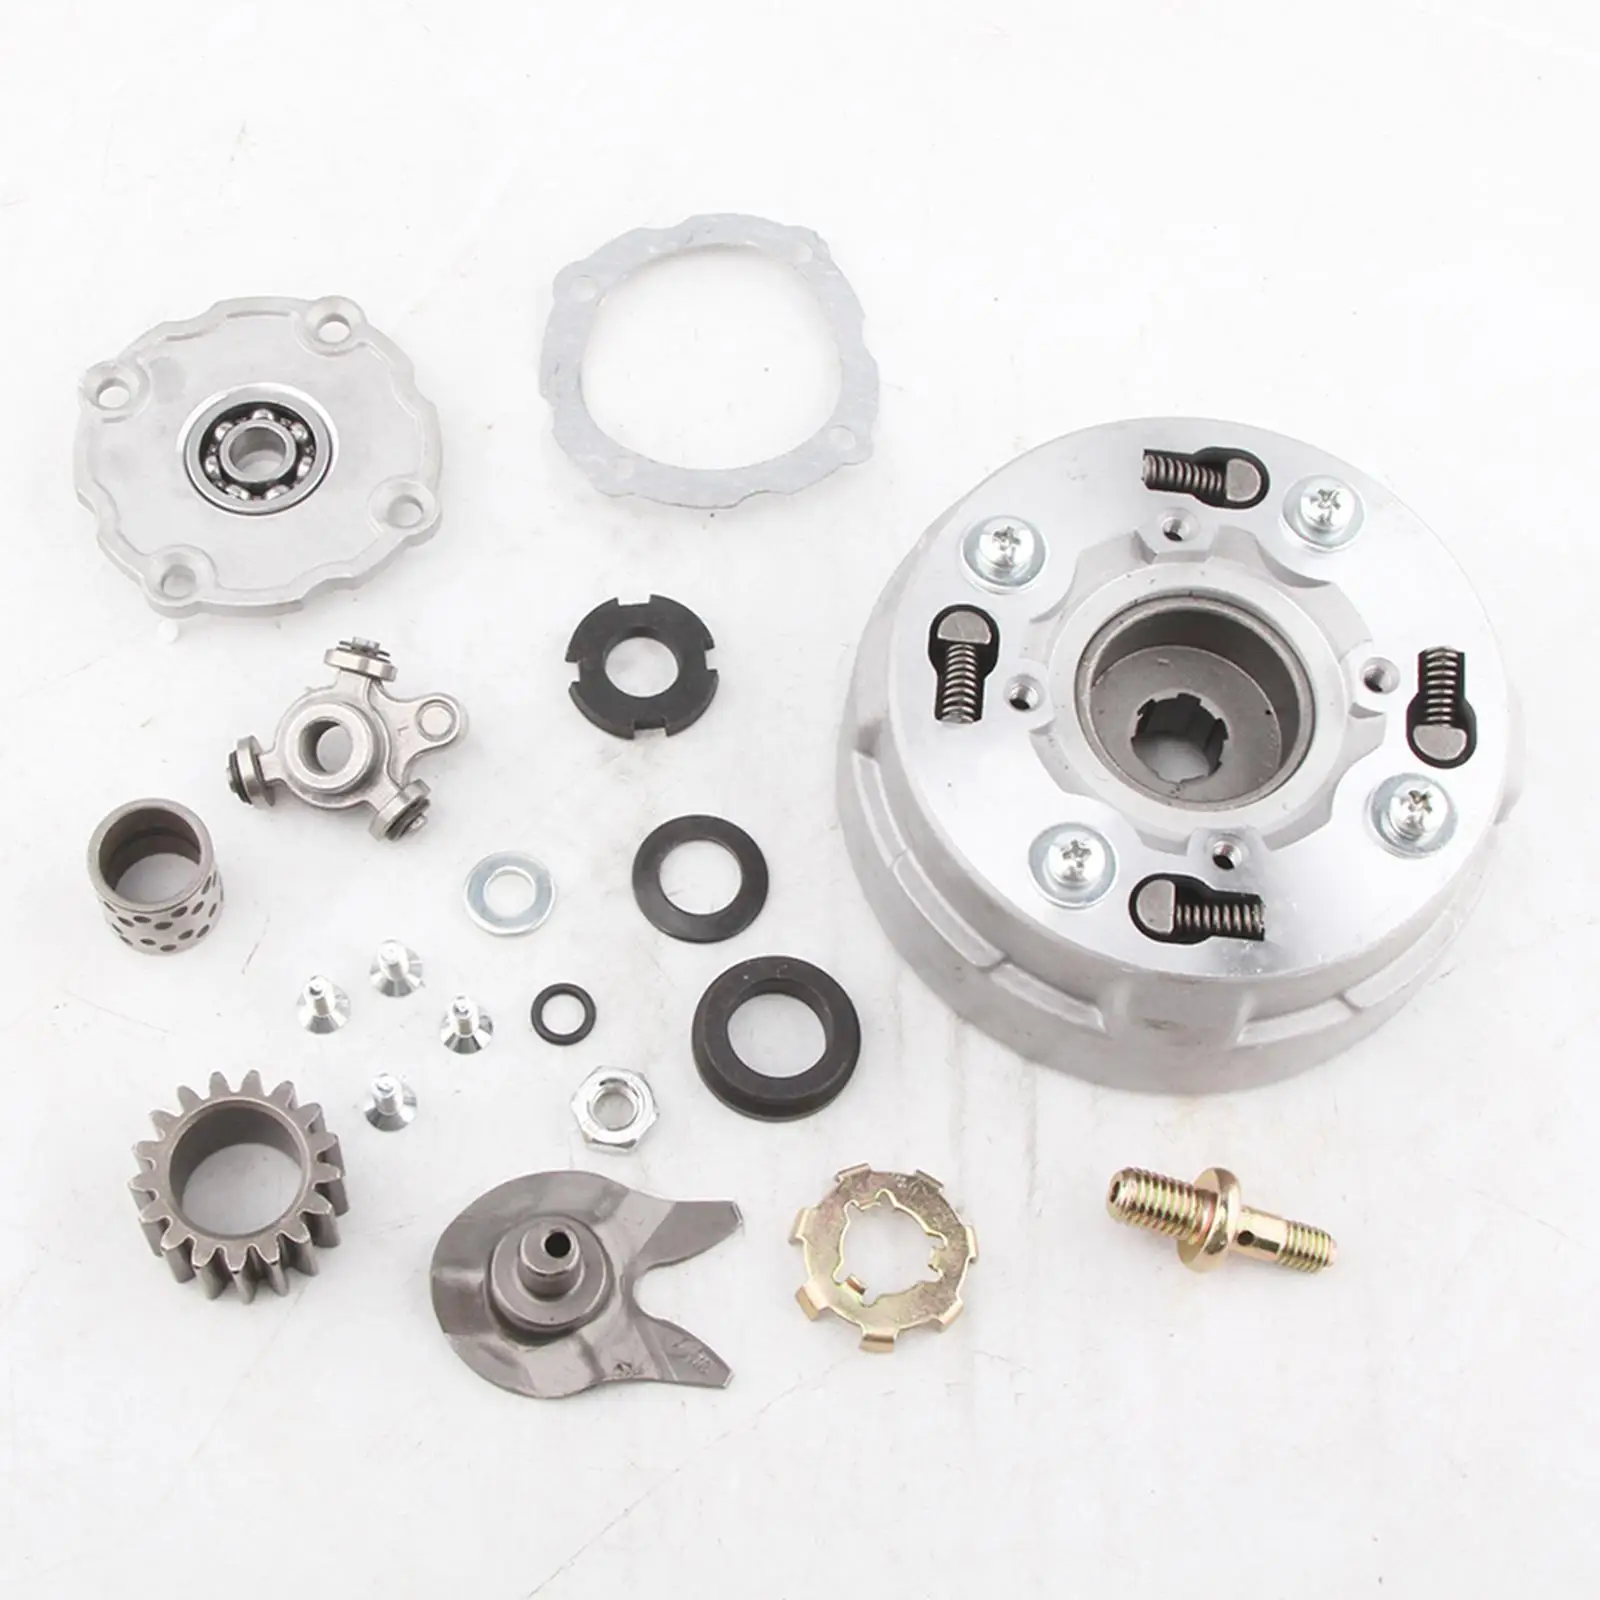 Semi-automatic clutch complete assembly kits for Chinese 90cc ATV,